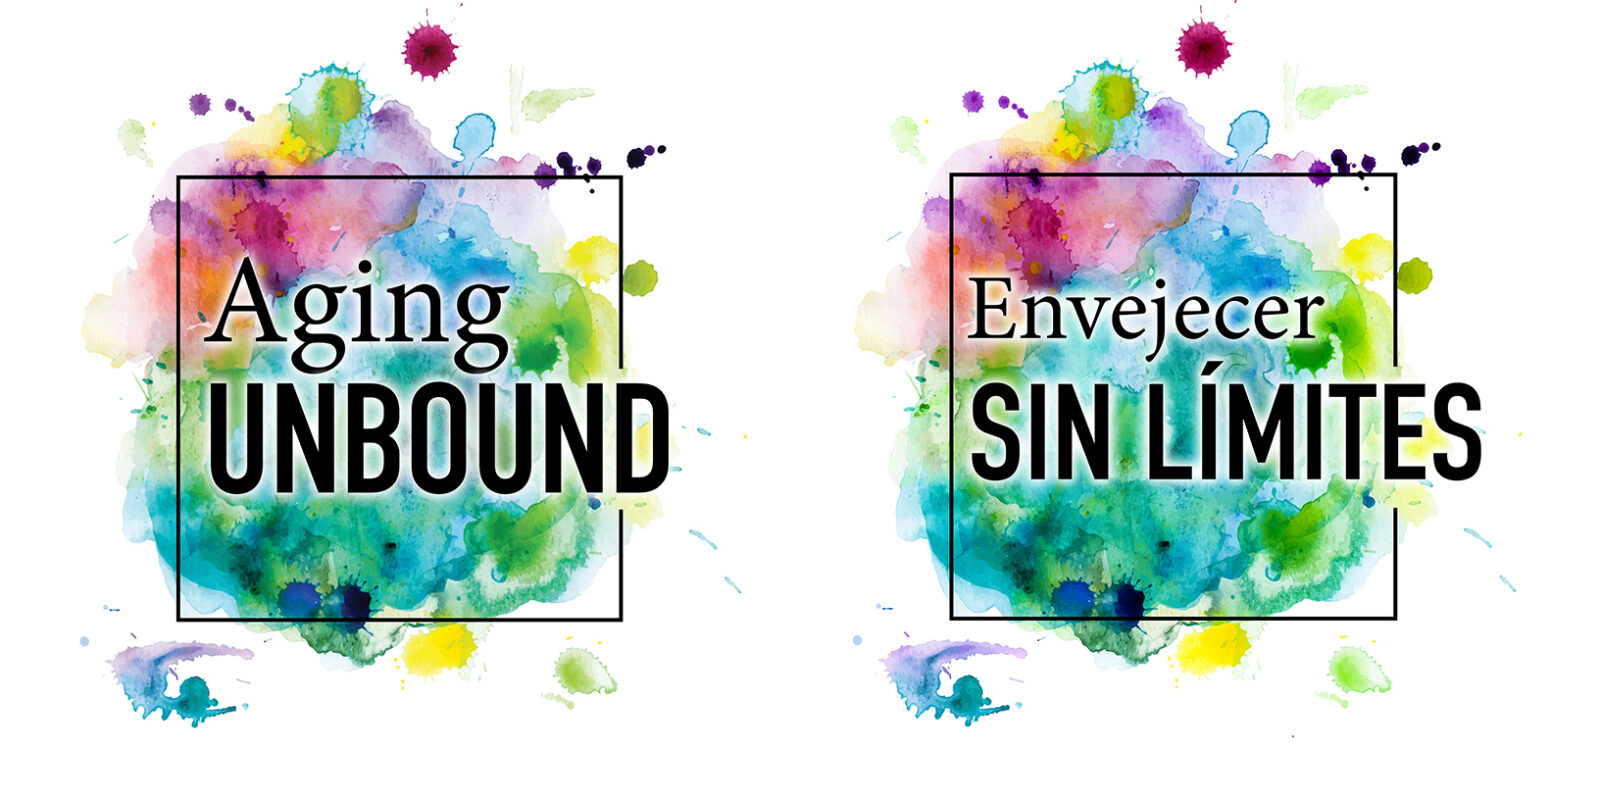 Aging Unbound and Envejecer Sin Limites logos (English and Spanish)